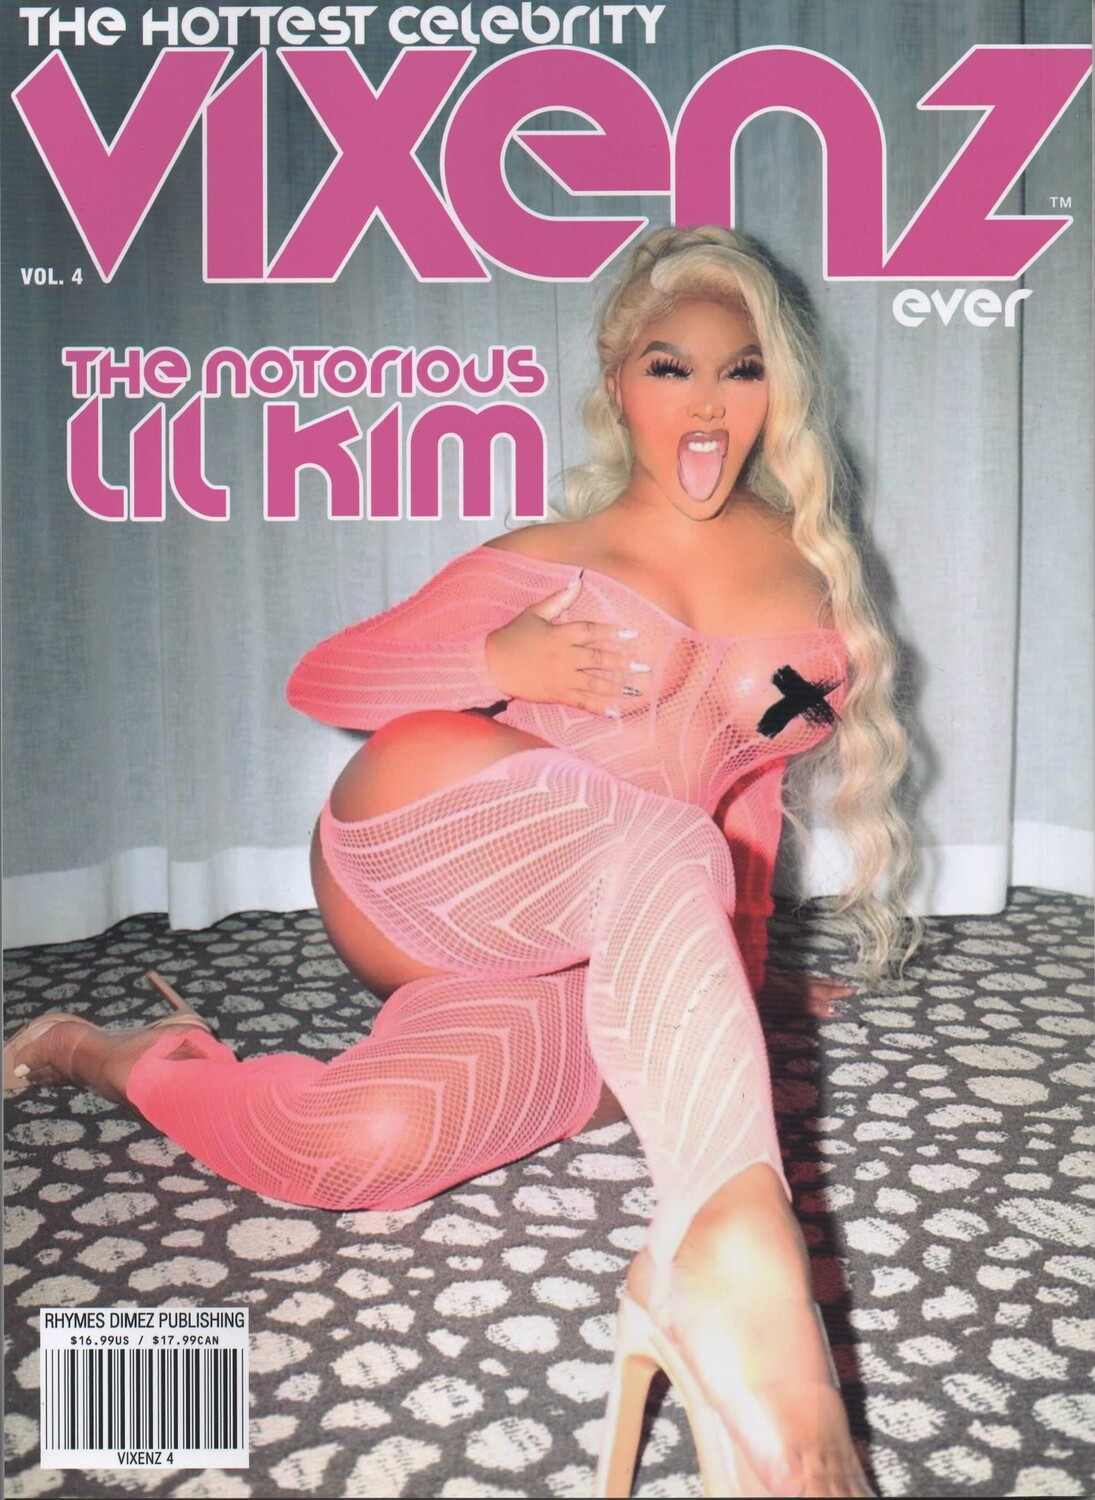 Vixenz #4 Magazine Featuring The Notorious Lil Kim